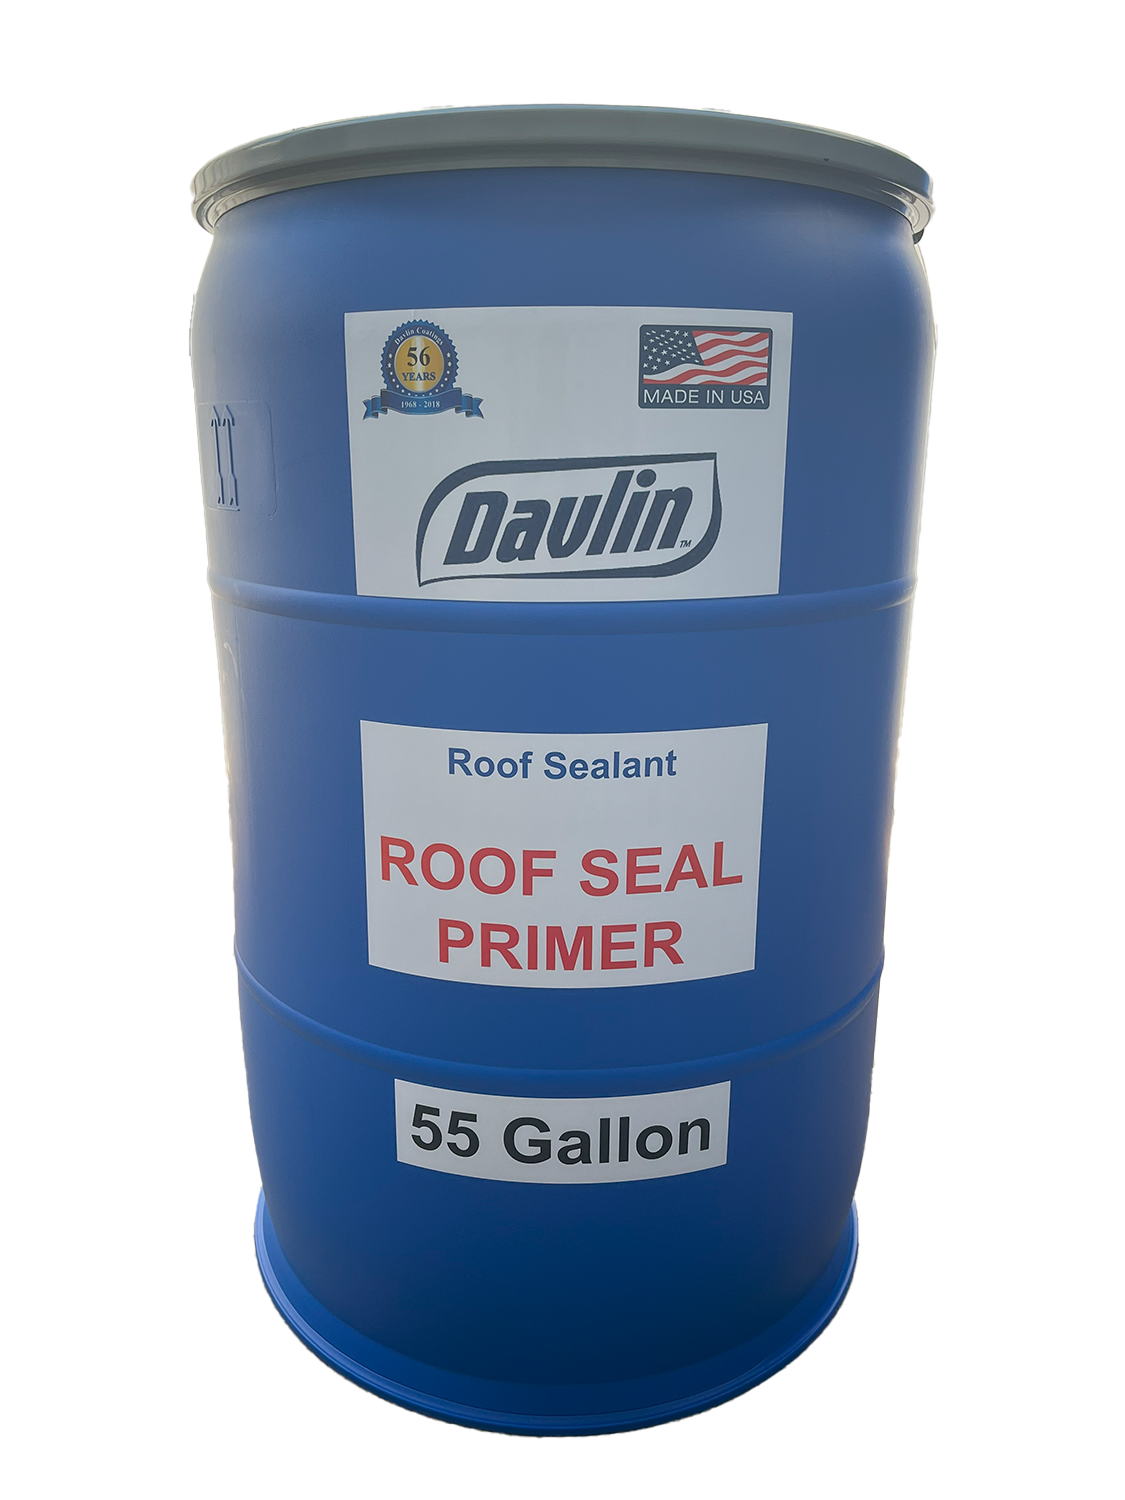 Roof Sealant - Roof Primer - Roofseal Bleed Blocking Primer - 5 Gal - 100% Acrylic - Free Shipping - Free Sample